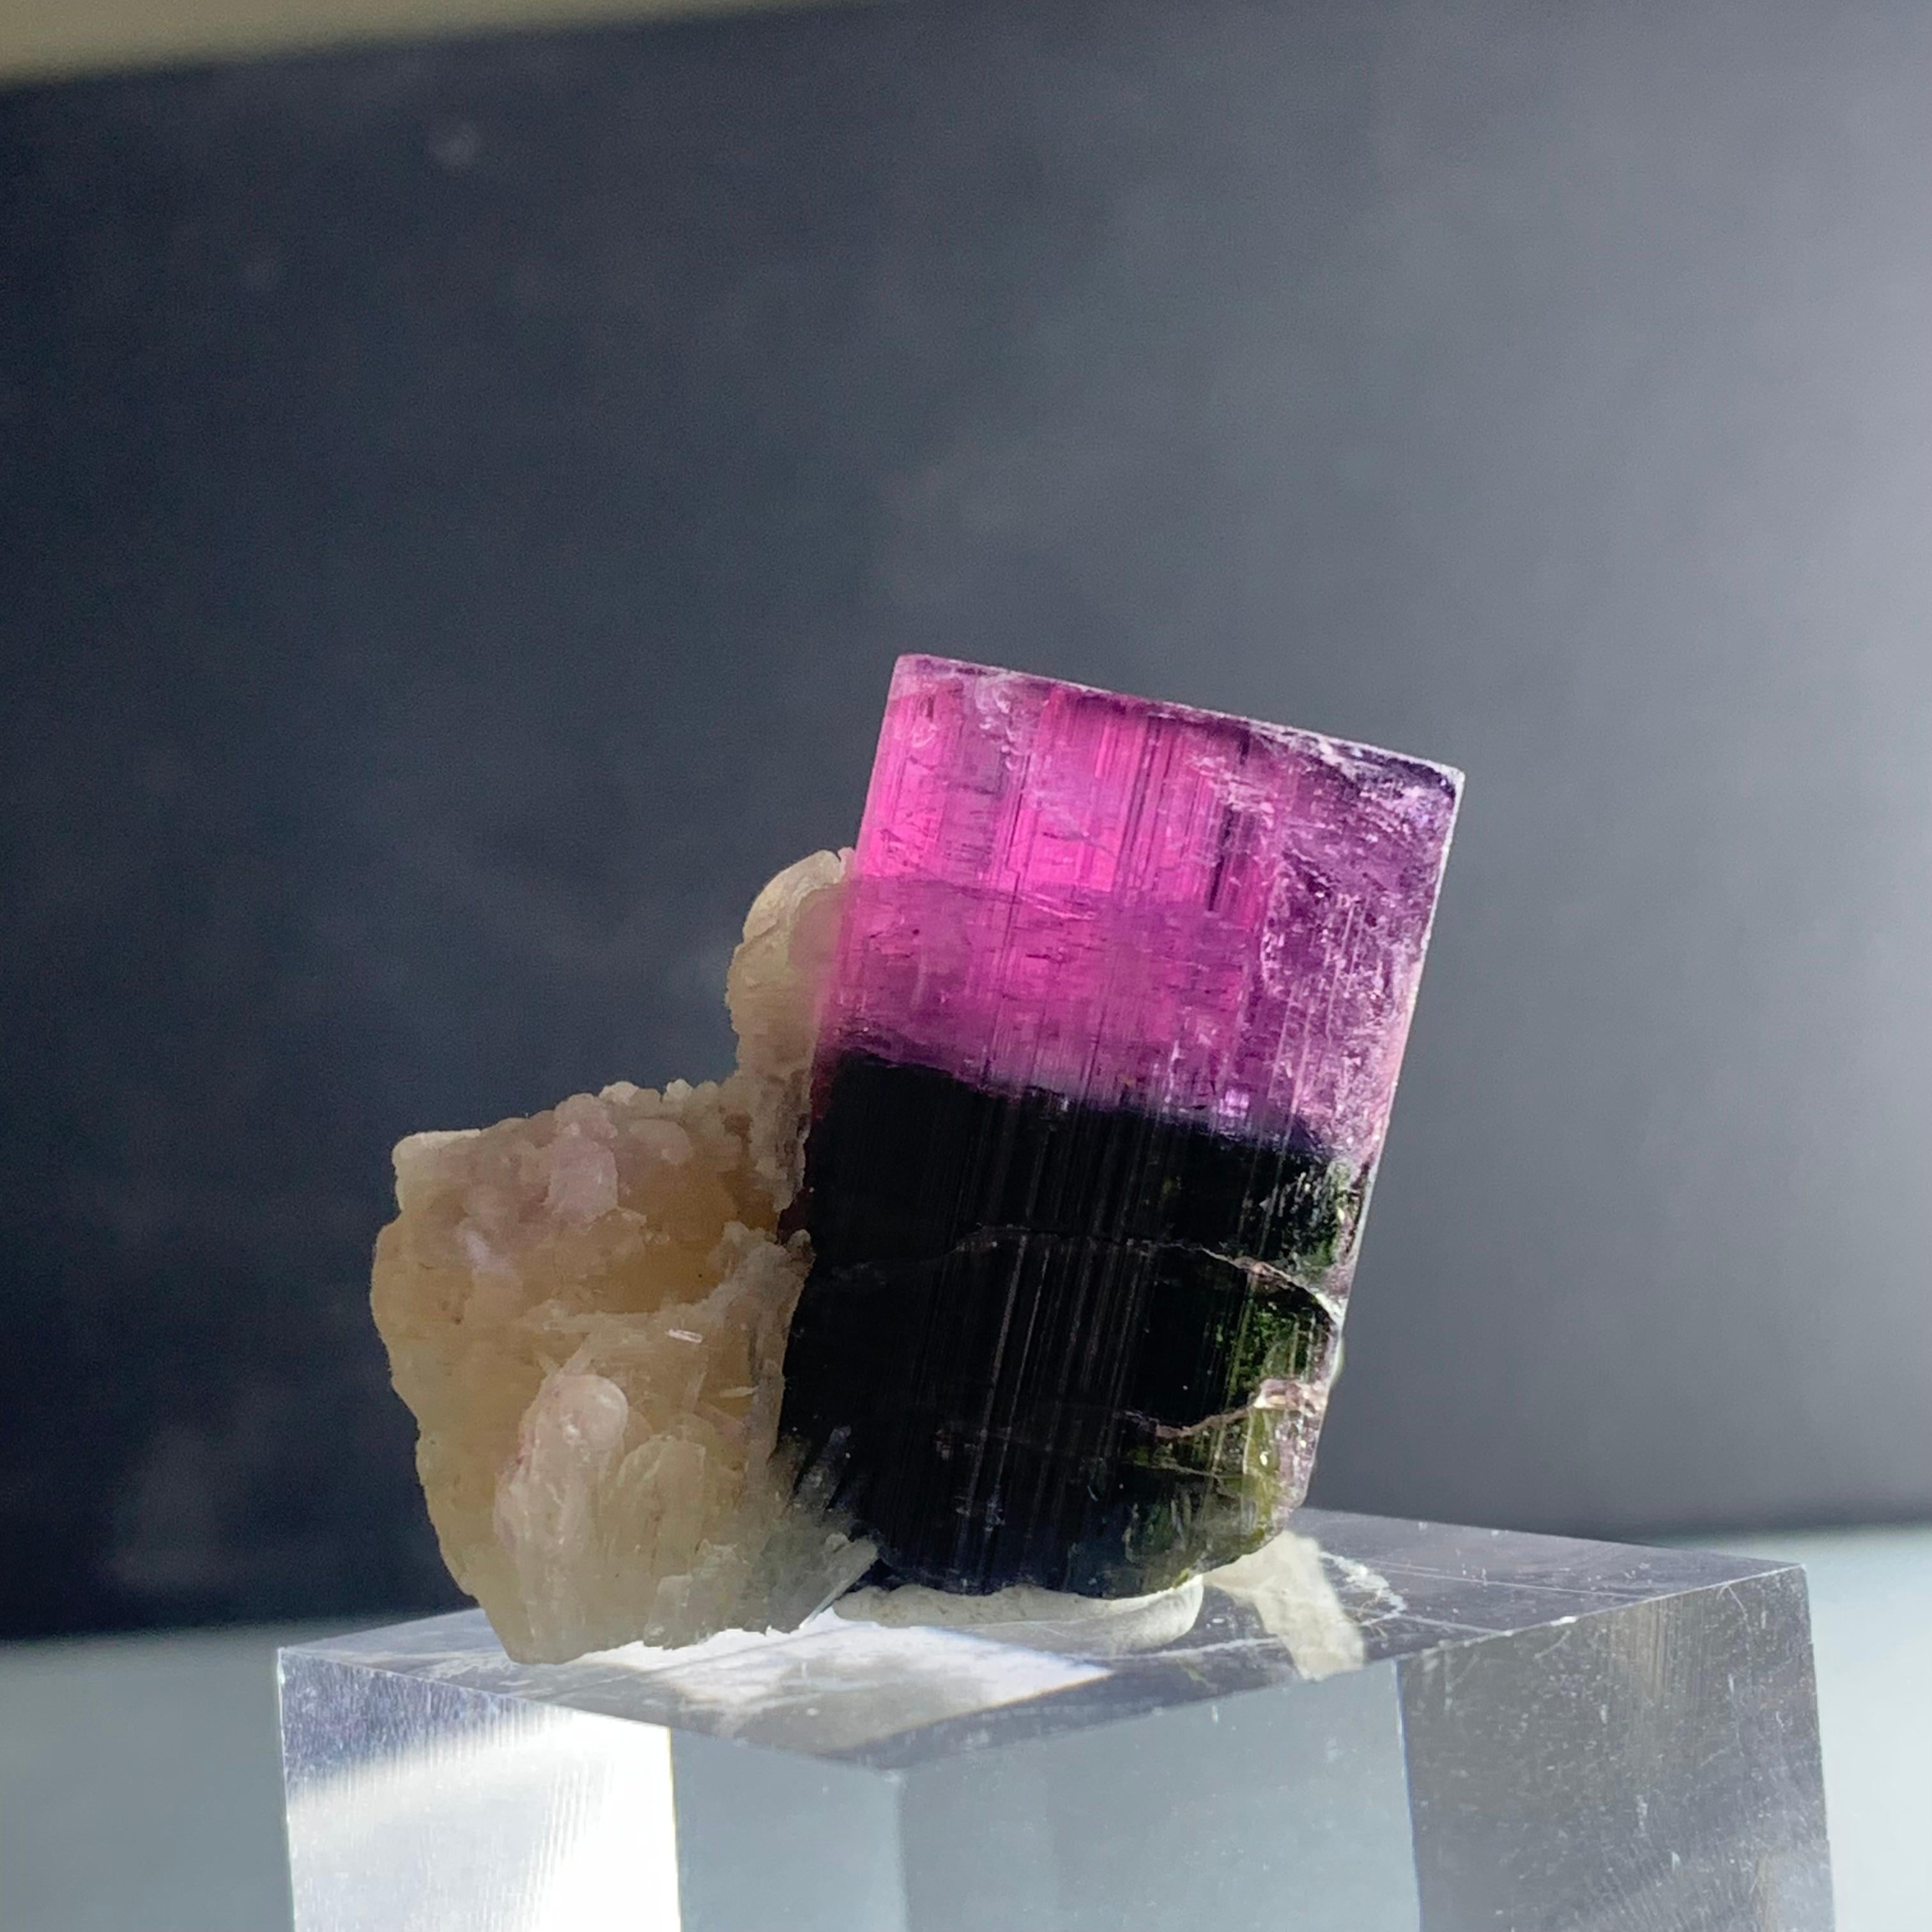 Natural 81.95 Gram Bicolor Tourmaline Crystal Elongated On Mica Specimen 
WEIGHT: 81.95 grams
DIMENSION: 2.8 x 3.2 x 1.9 Cm
ORIGIN : Nooristan, Afghanistan
COLOR: Pink And Black
TREATMENT: None
Tourmaline is an extremely popular gemstone; the